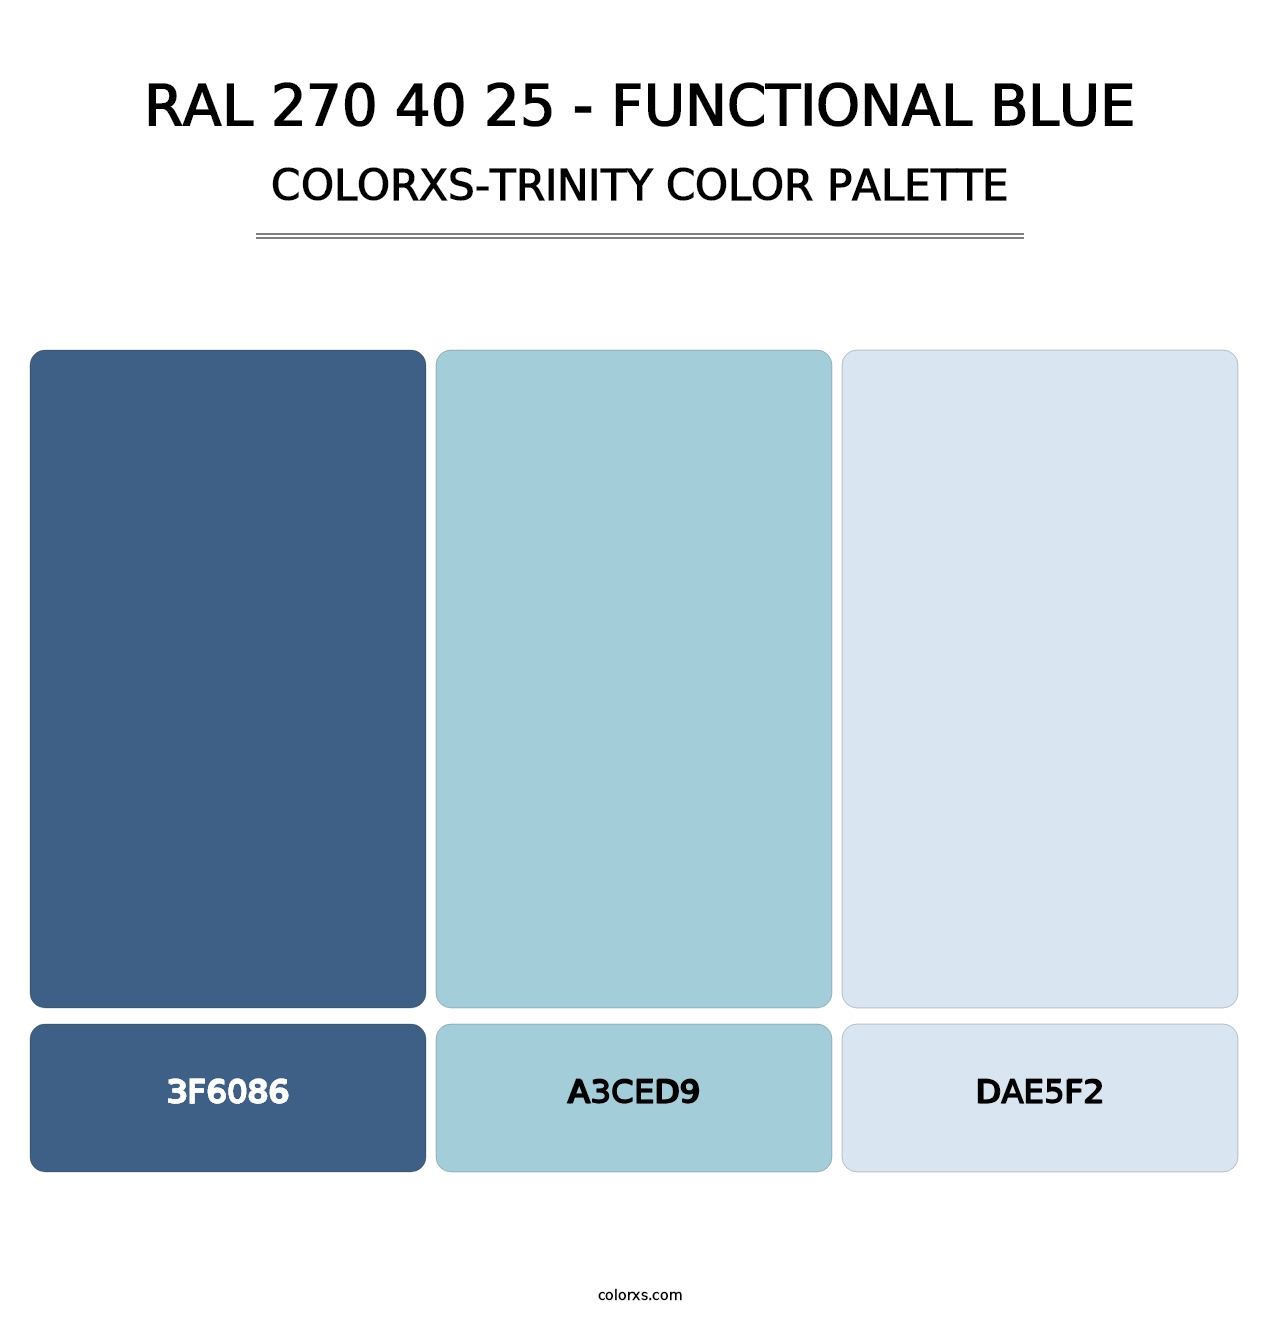 RAL 270 40 25 - Functional Blue - Colorxs Trinity Palette